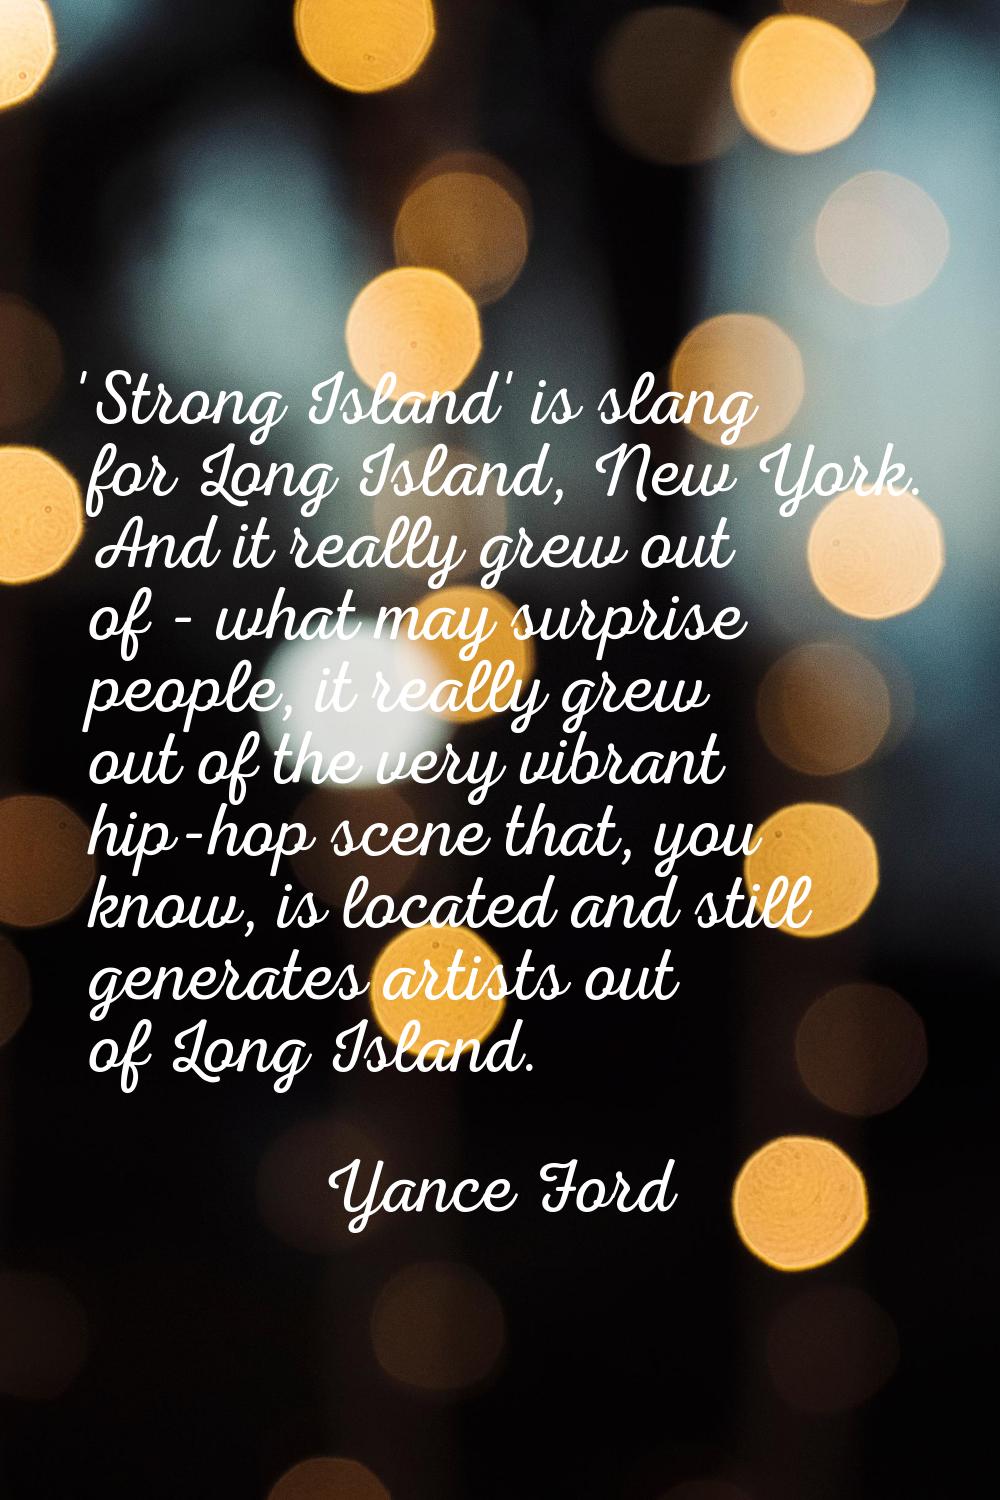 'Strong Island' is slang for Long Island, New York. And it really grew out of - what may surprise p